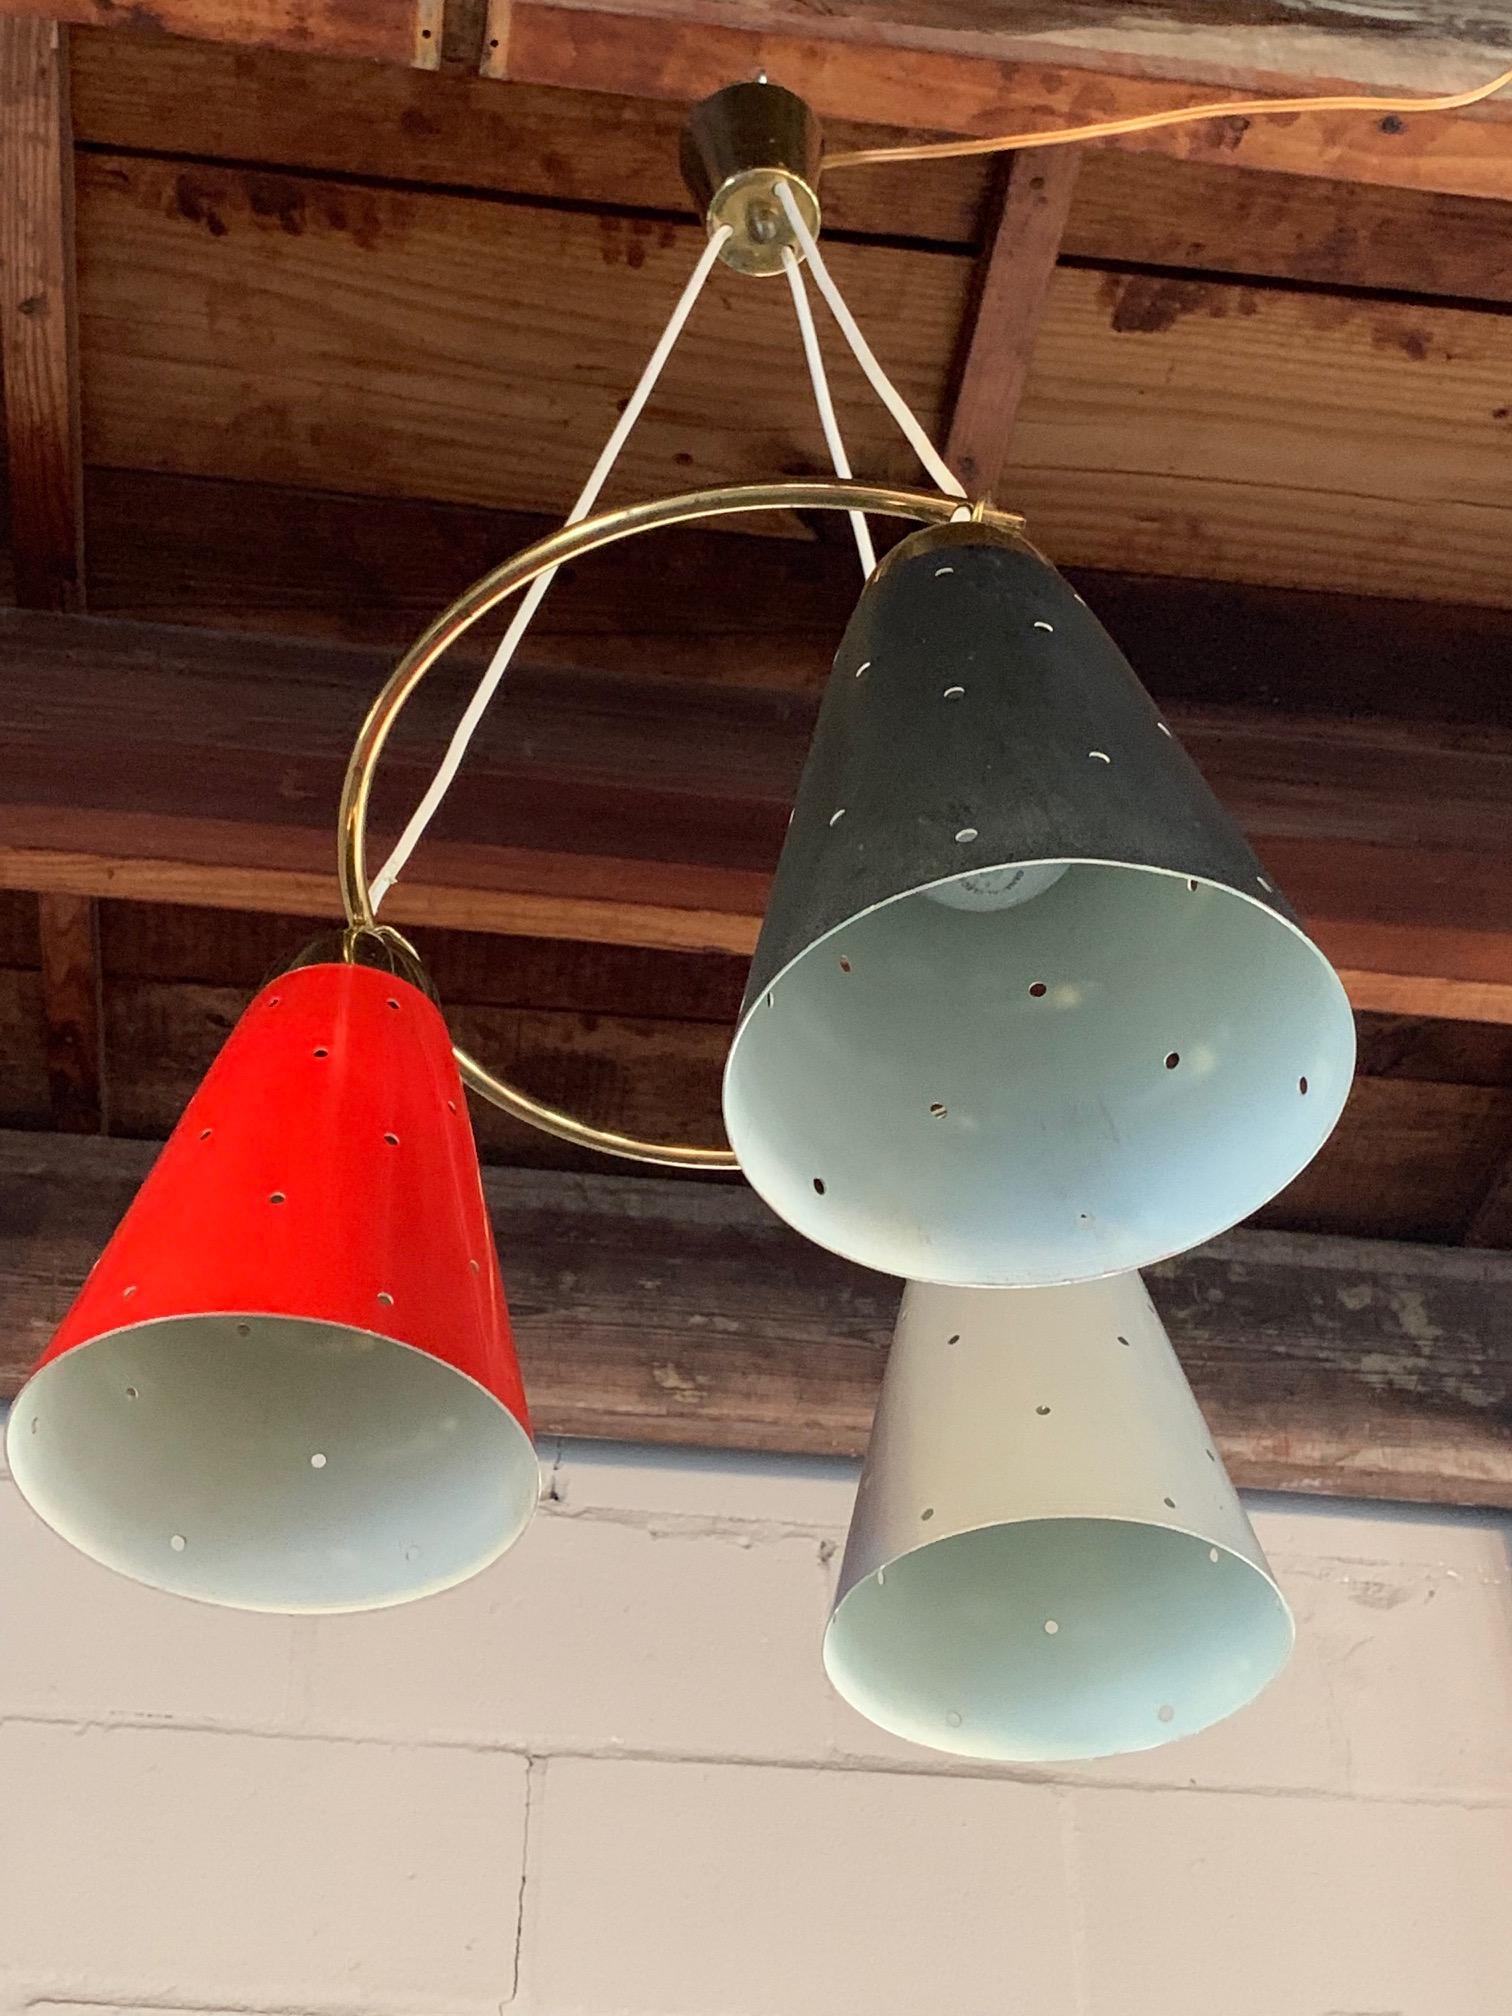 An elegant and unusual midcentury chandelier. Made in Germany-three aluminum shades-red, black, white with large perforations. Features a brass curved decorative ring.